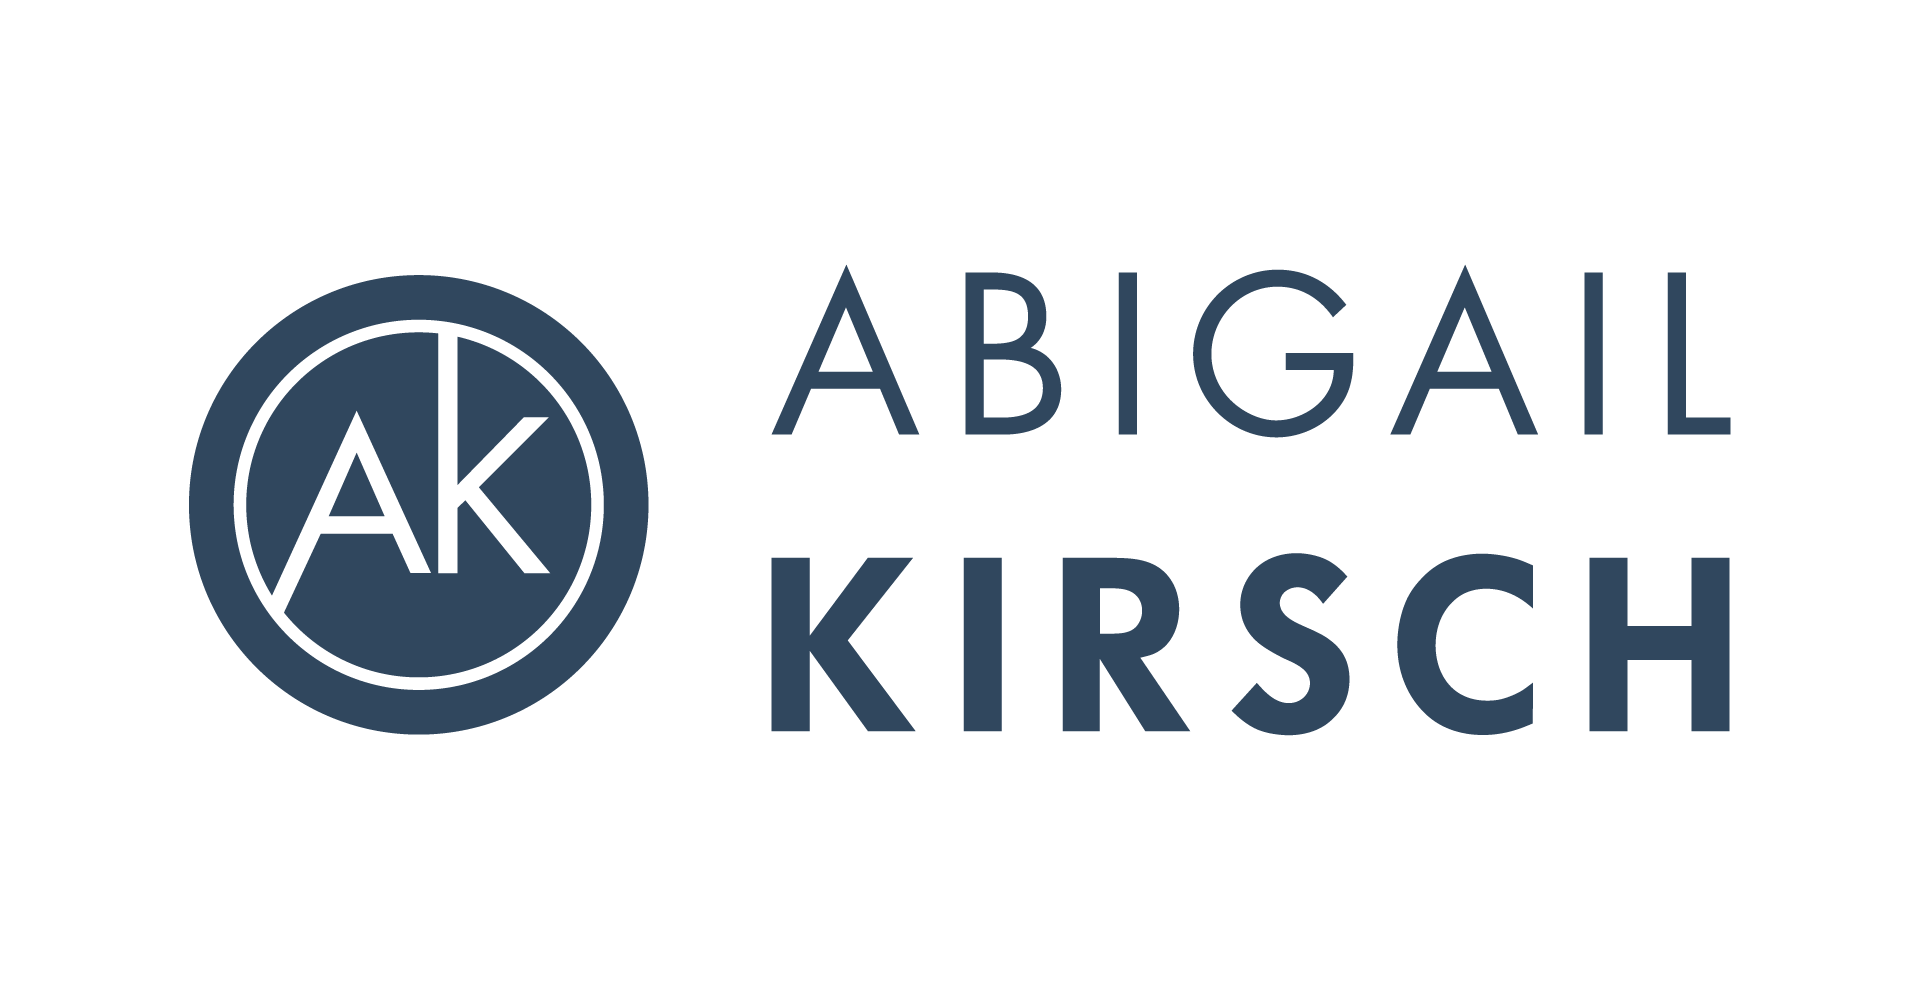 Abigail Kirsch logo used at ArtHouse Hotel